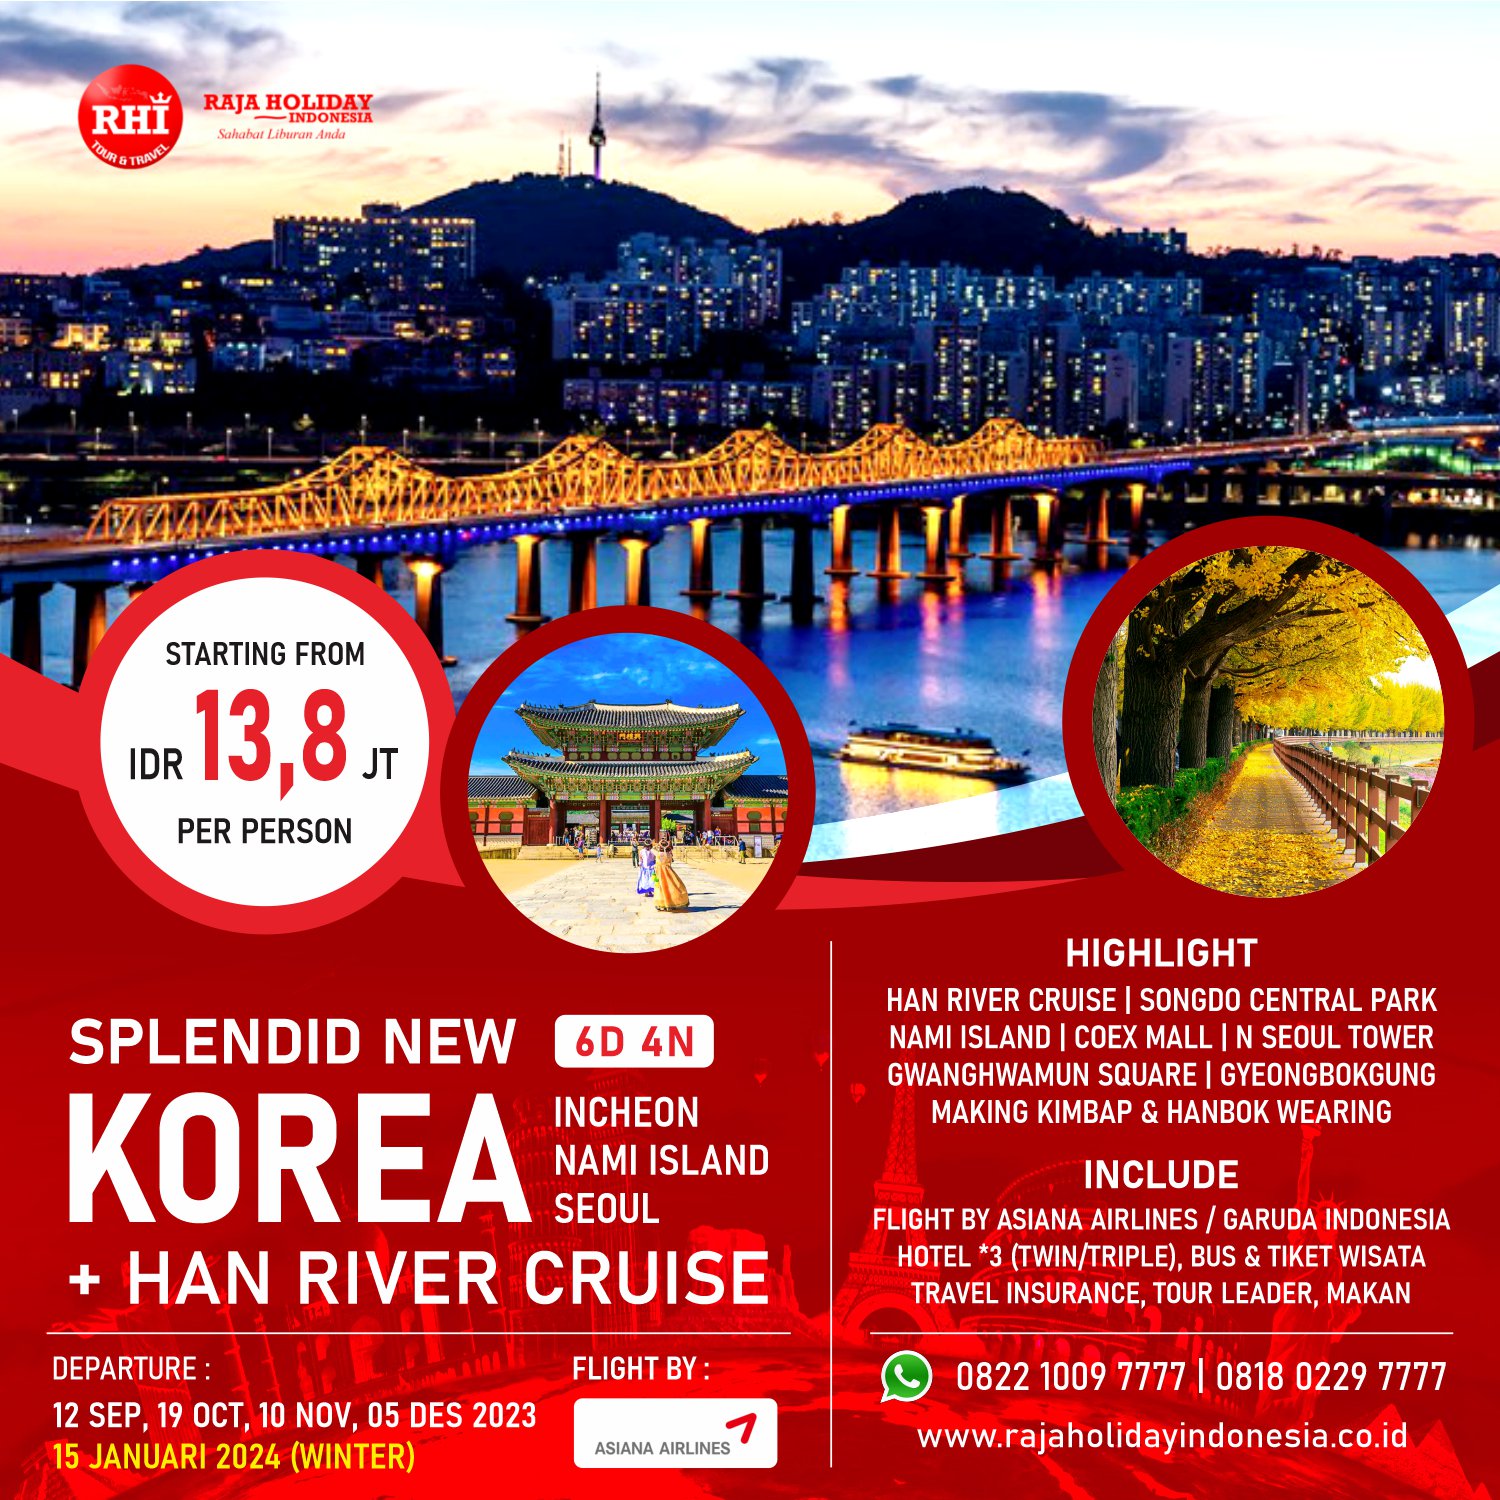 korea tour package from canada